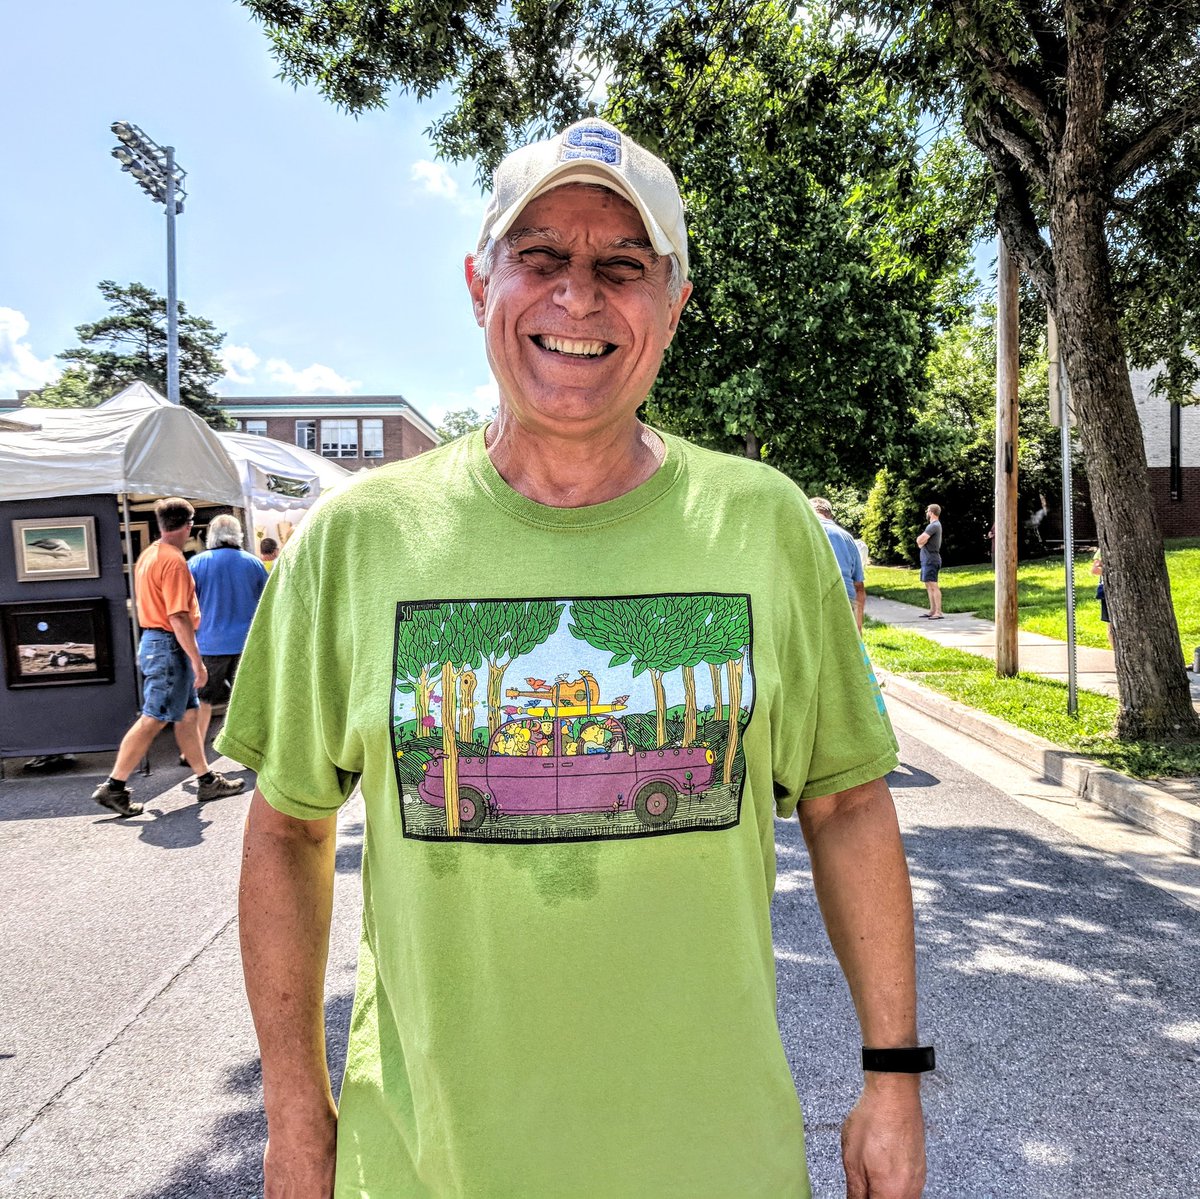 A smiling man wearing a green t-shirt for event.